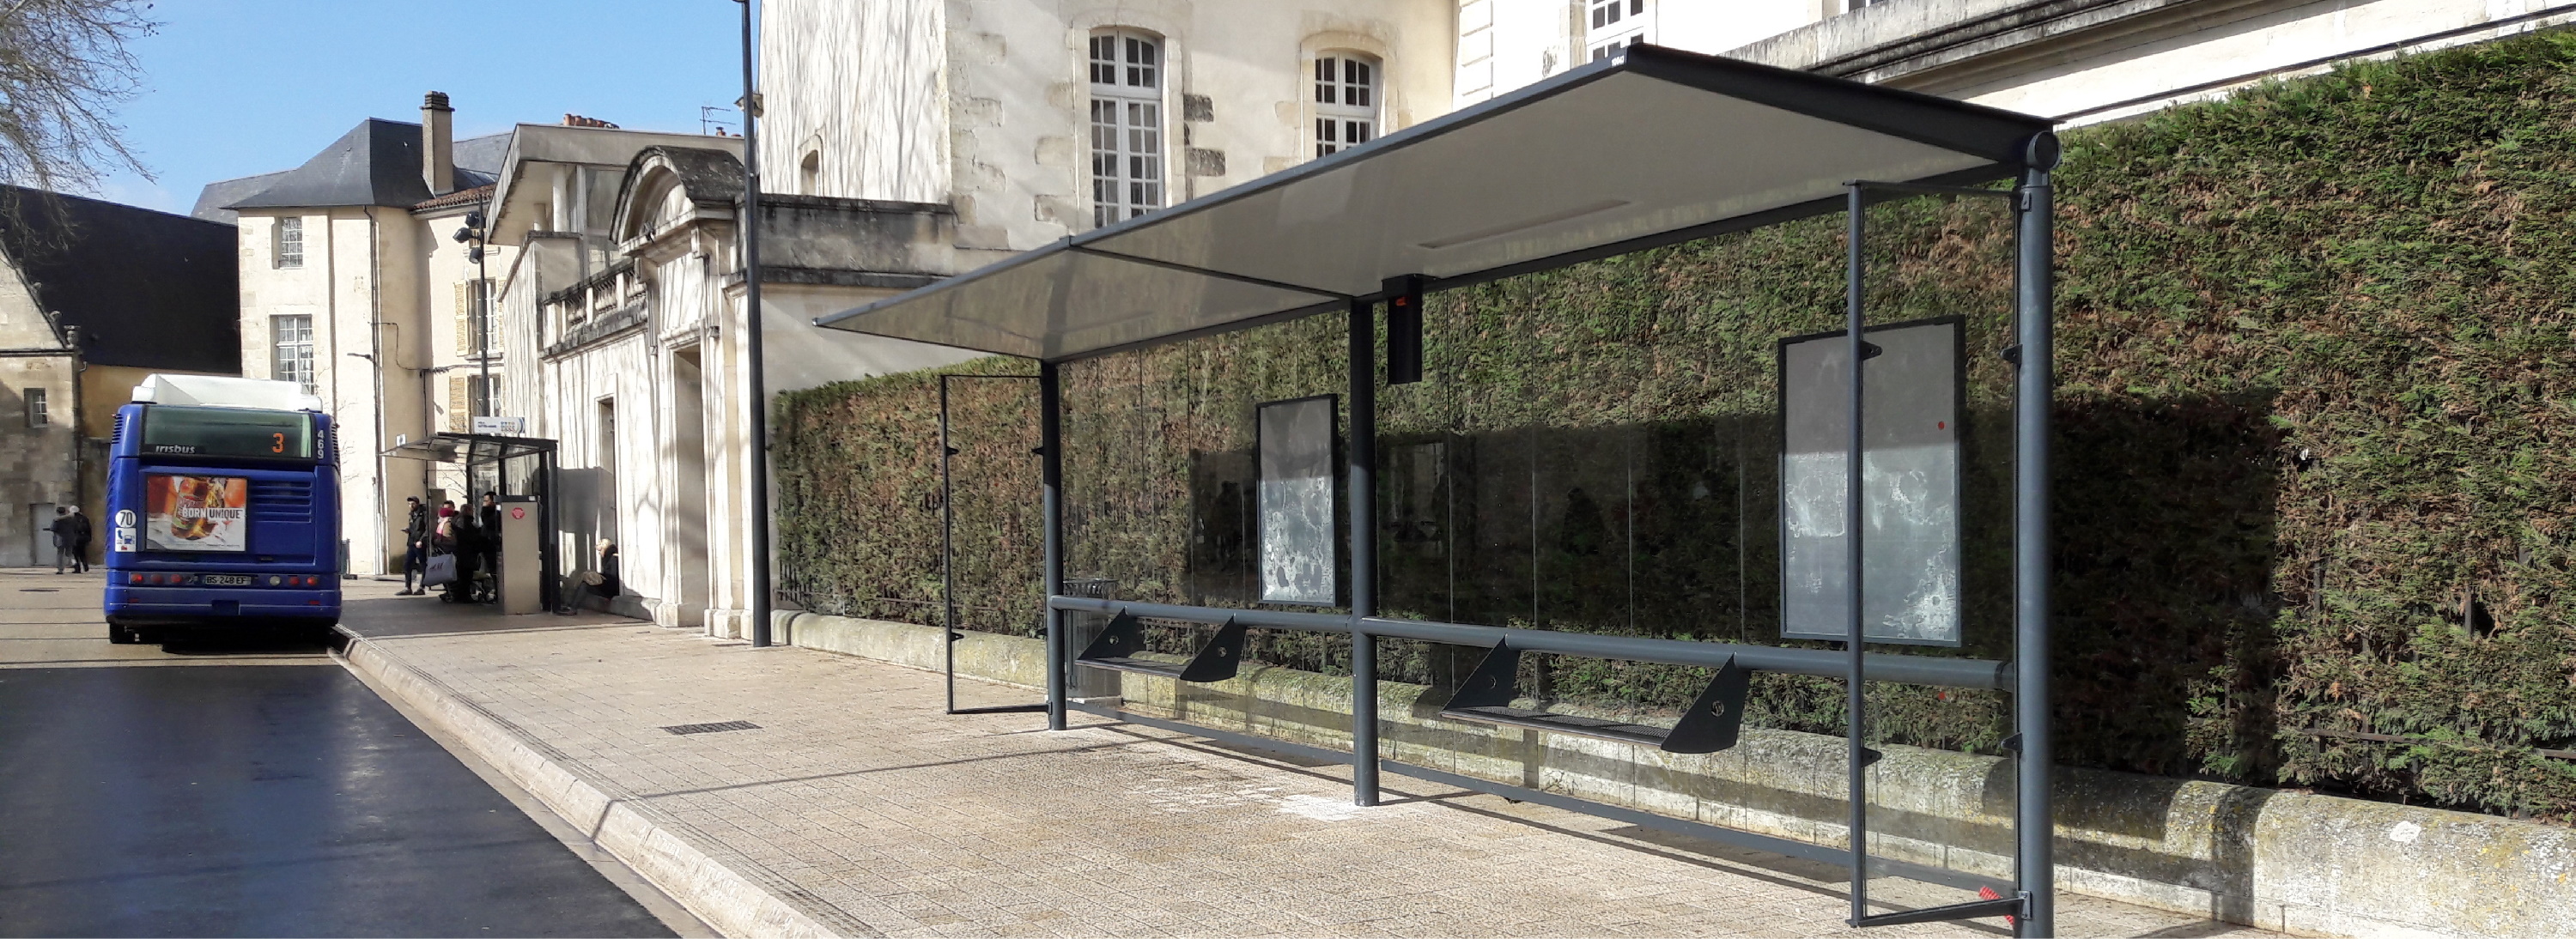 JC DECAUX - Over 100,000 bus shelters since 1960